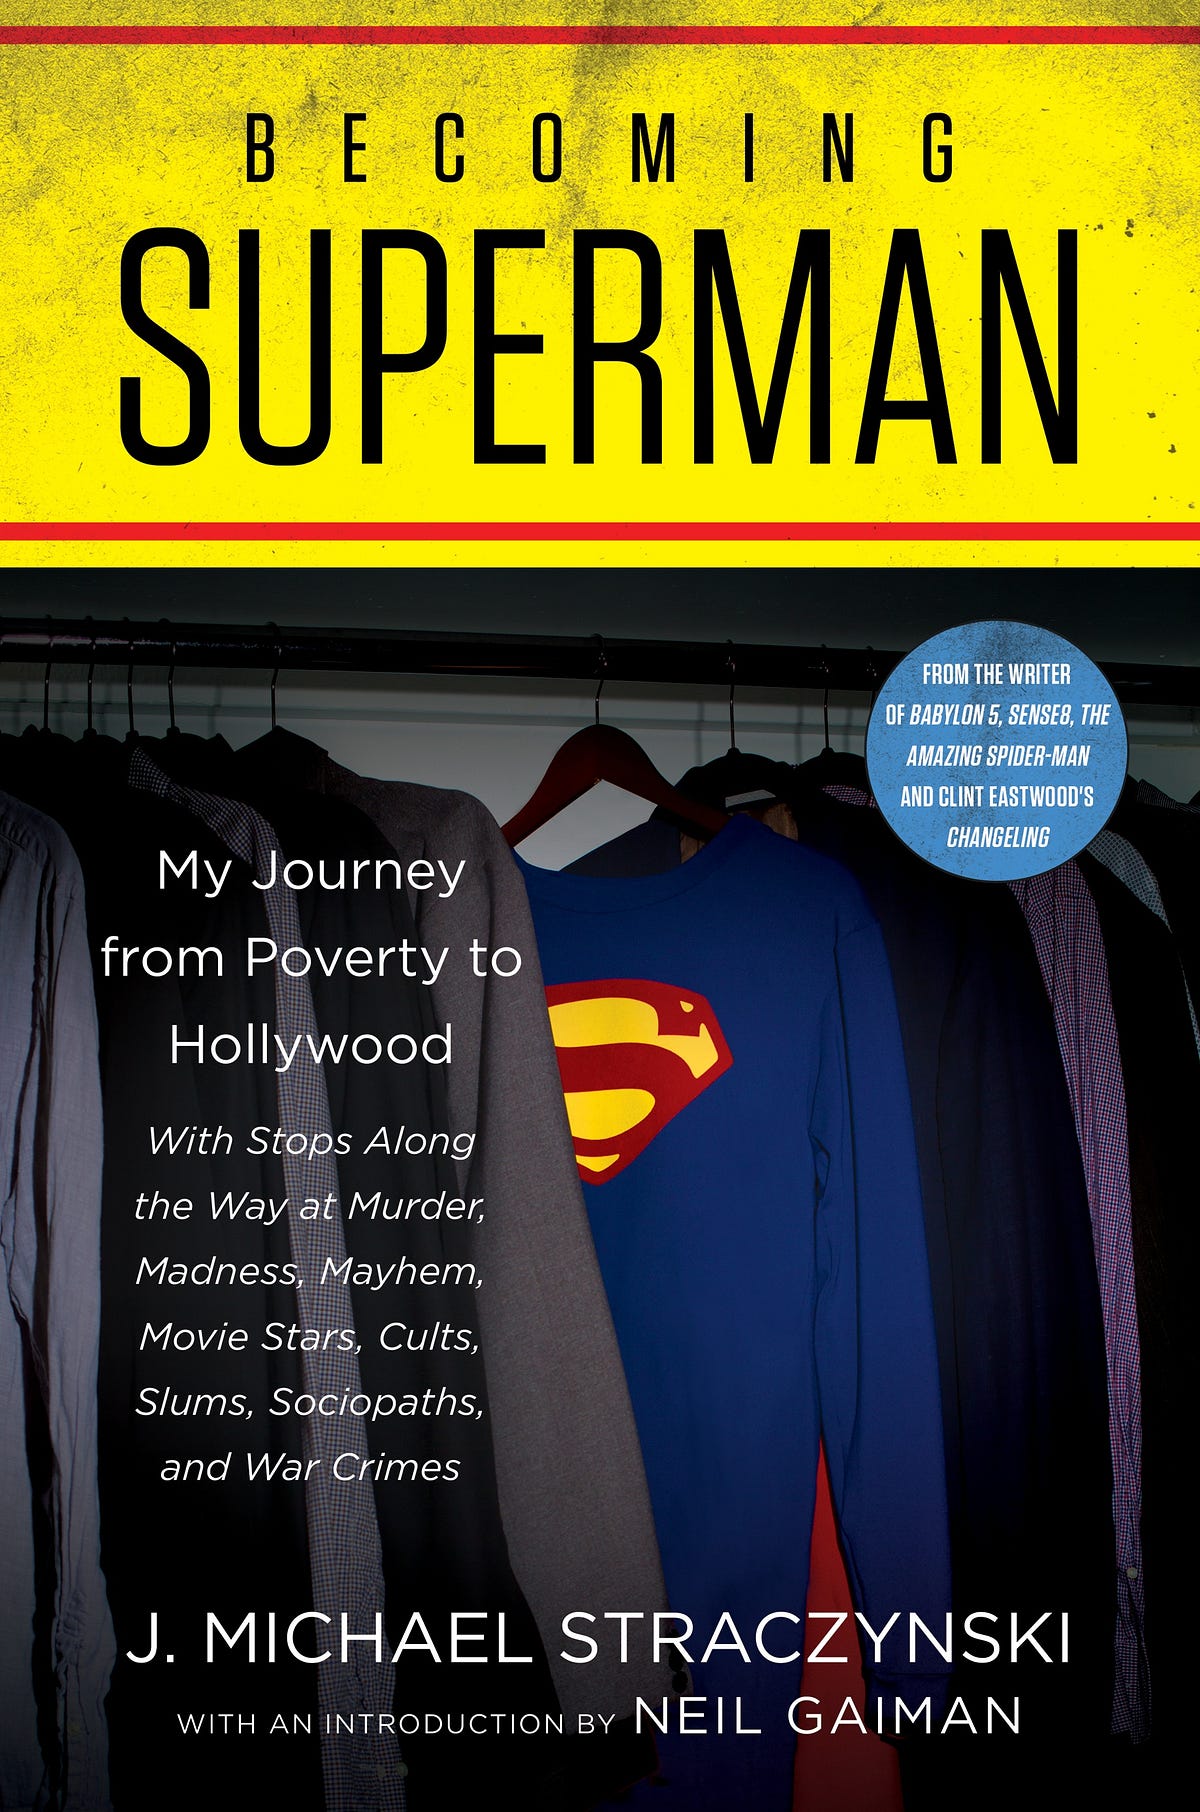 “Becoming Superman” The Book All Writers Need to Read